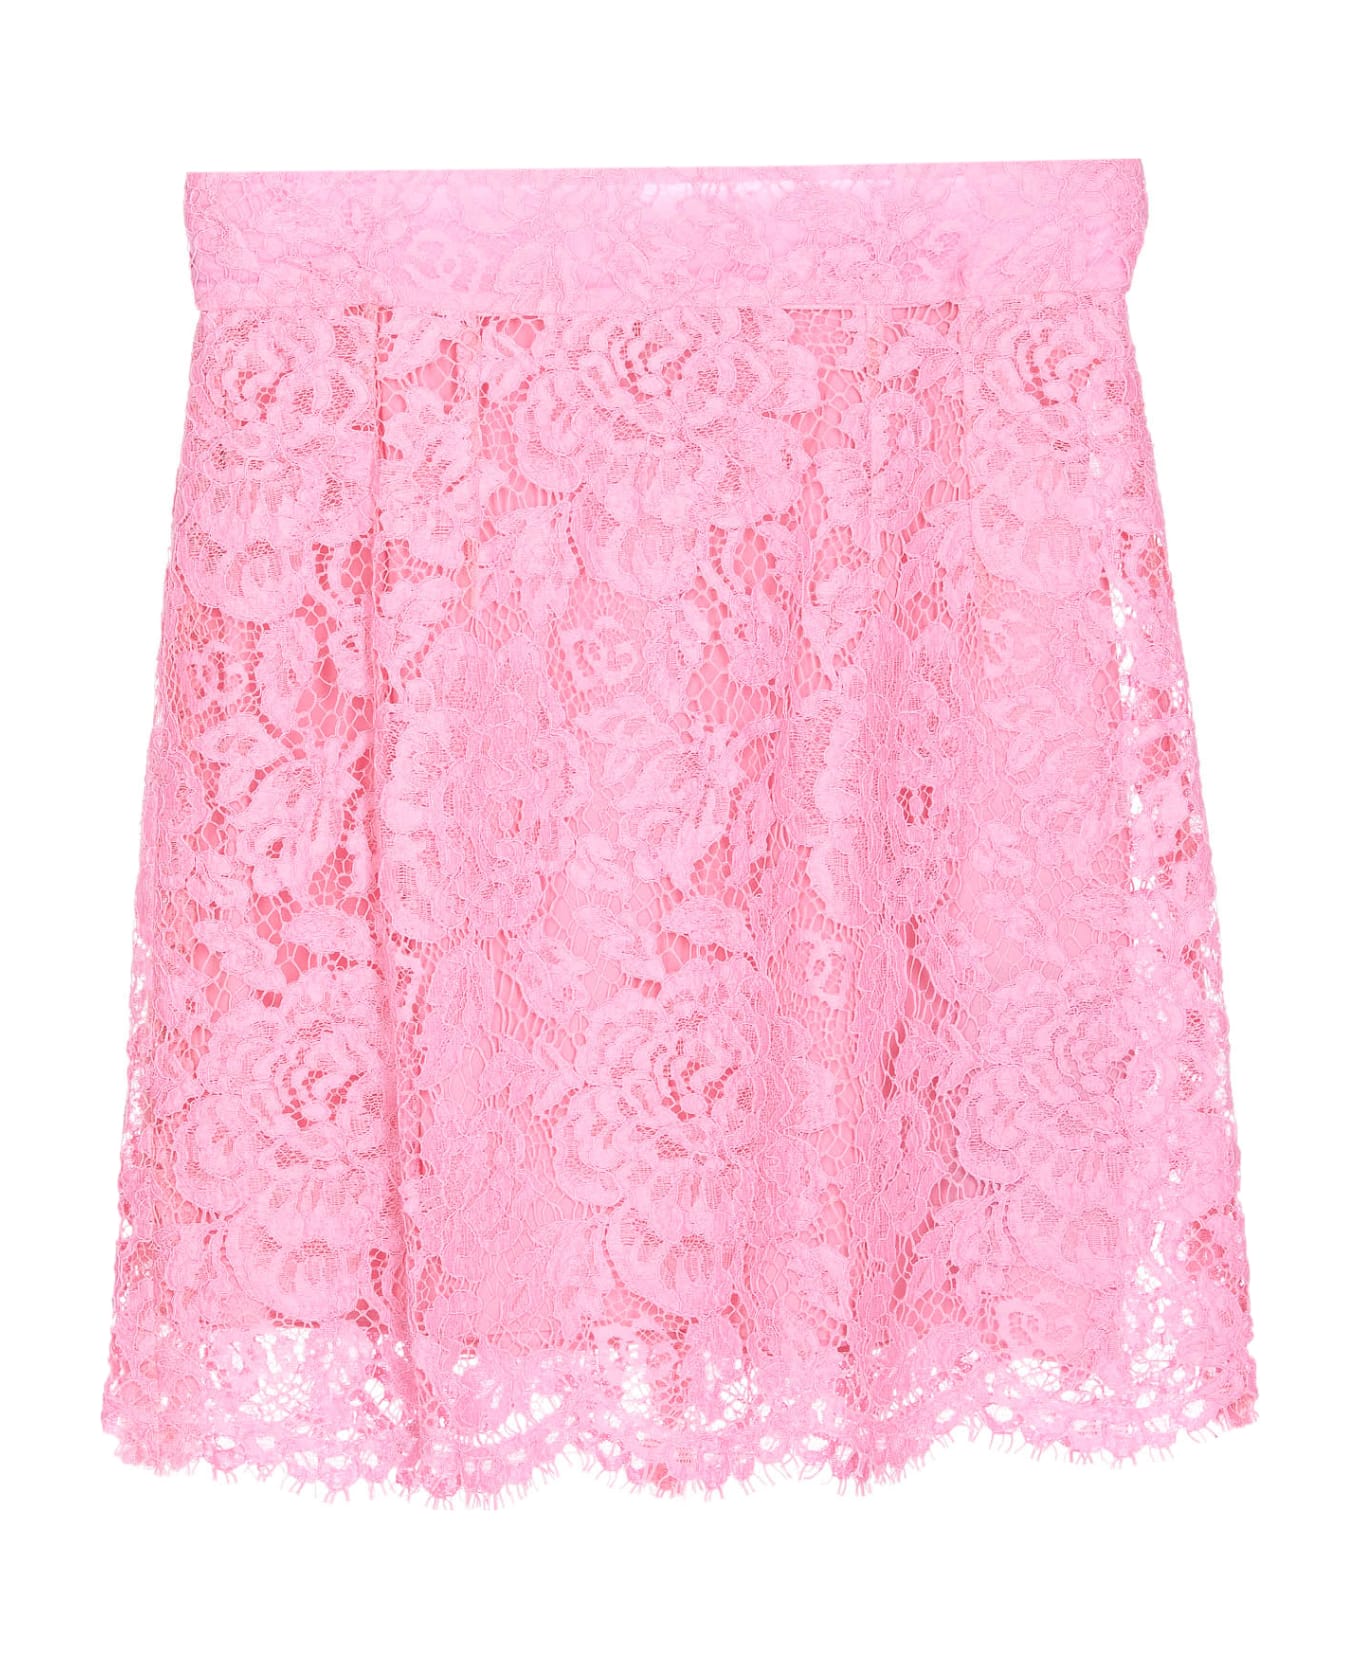 Dolce & Gabbana Branded Floral Cordonetto Lace Miniskirt - Pink